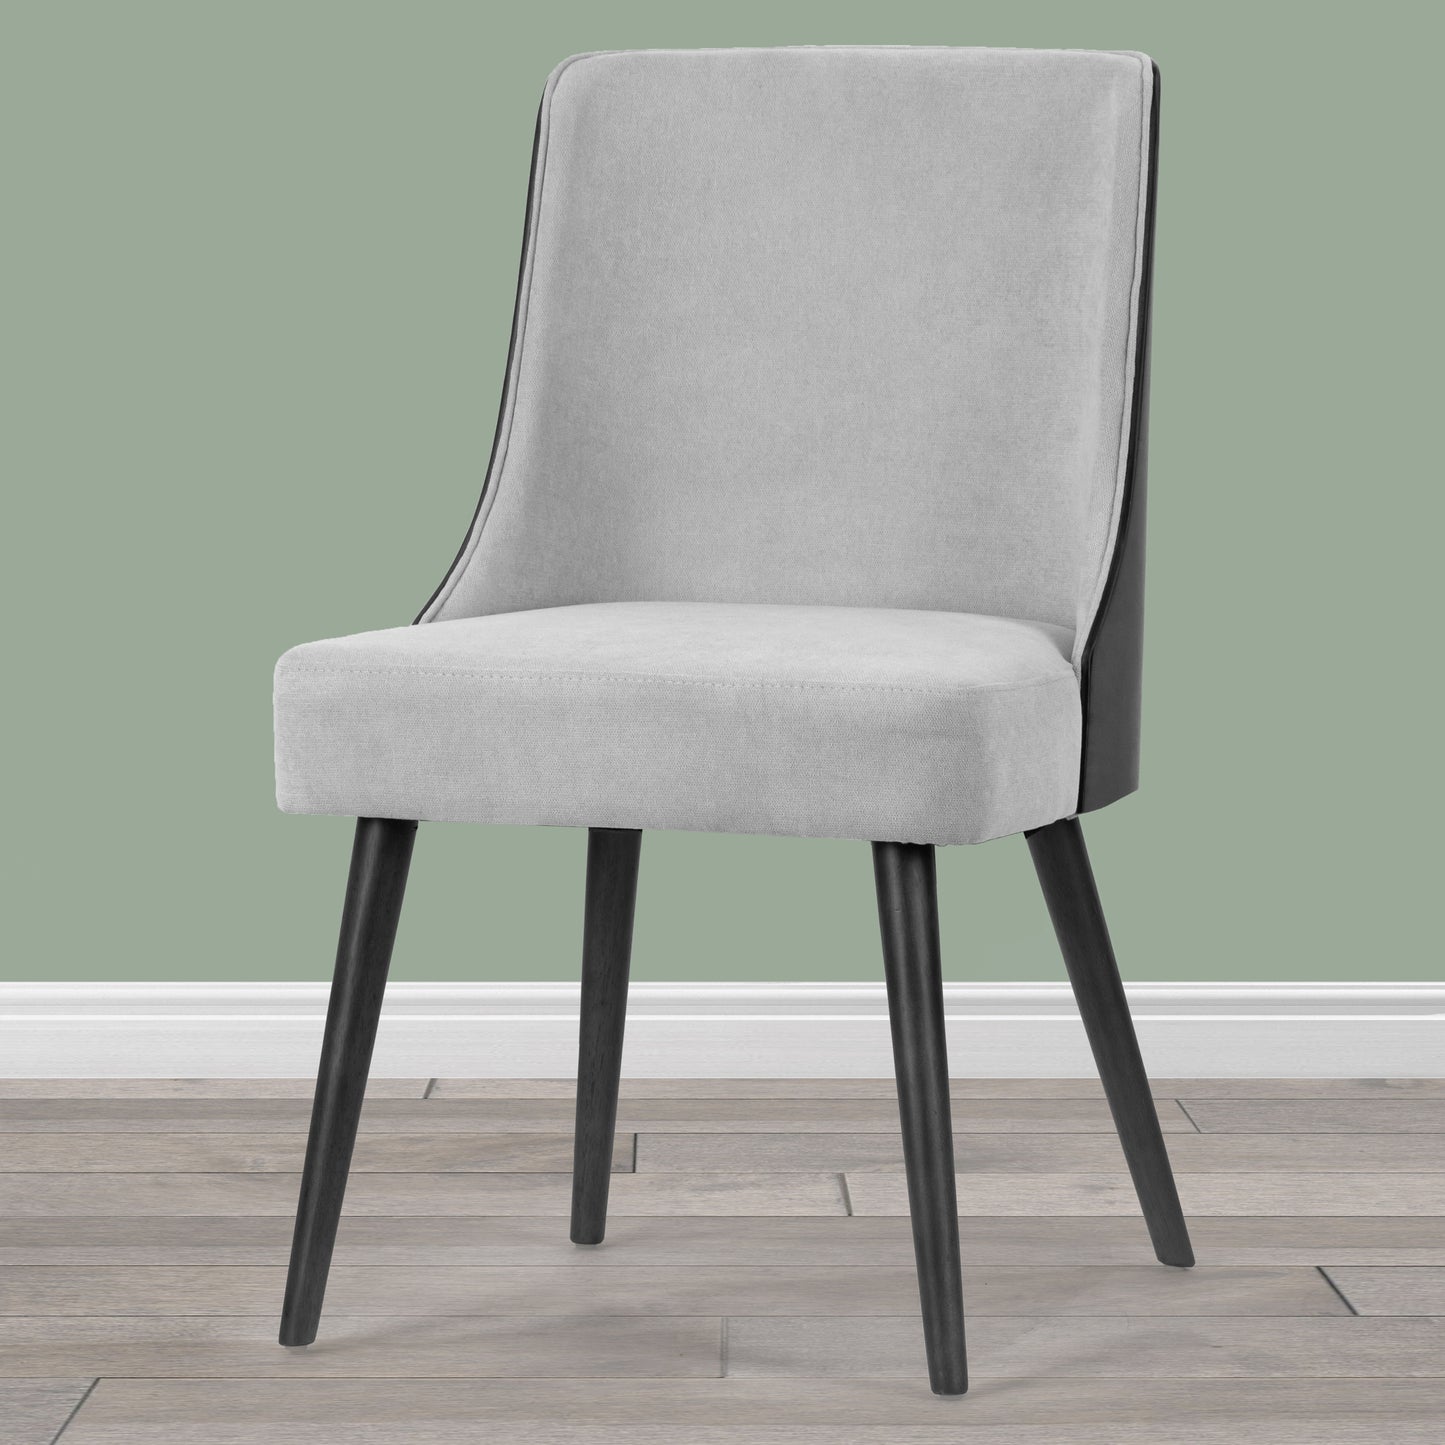 Set of 2 Asma Fabric Chair with Black Bentwood Back and Solid Wood Legs